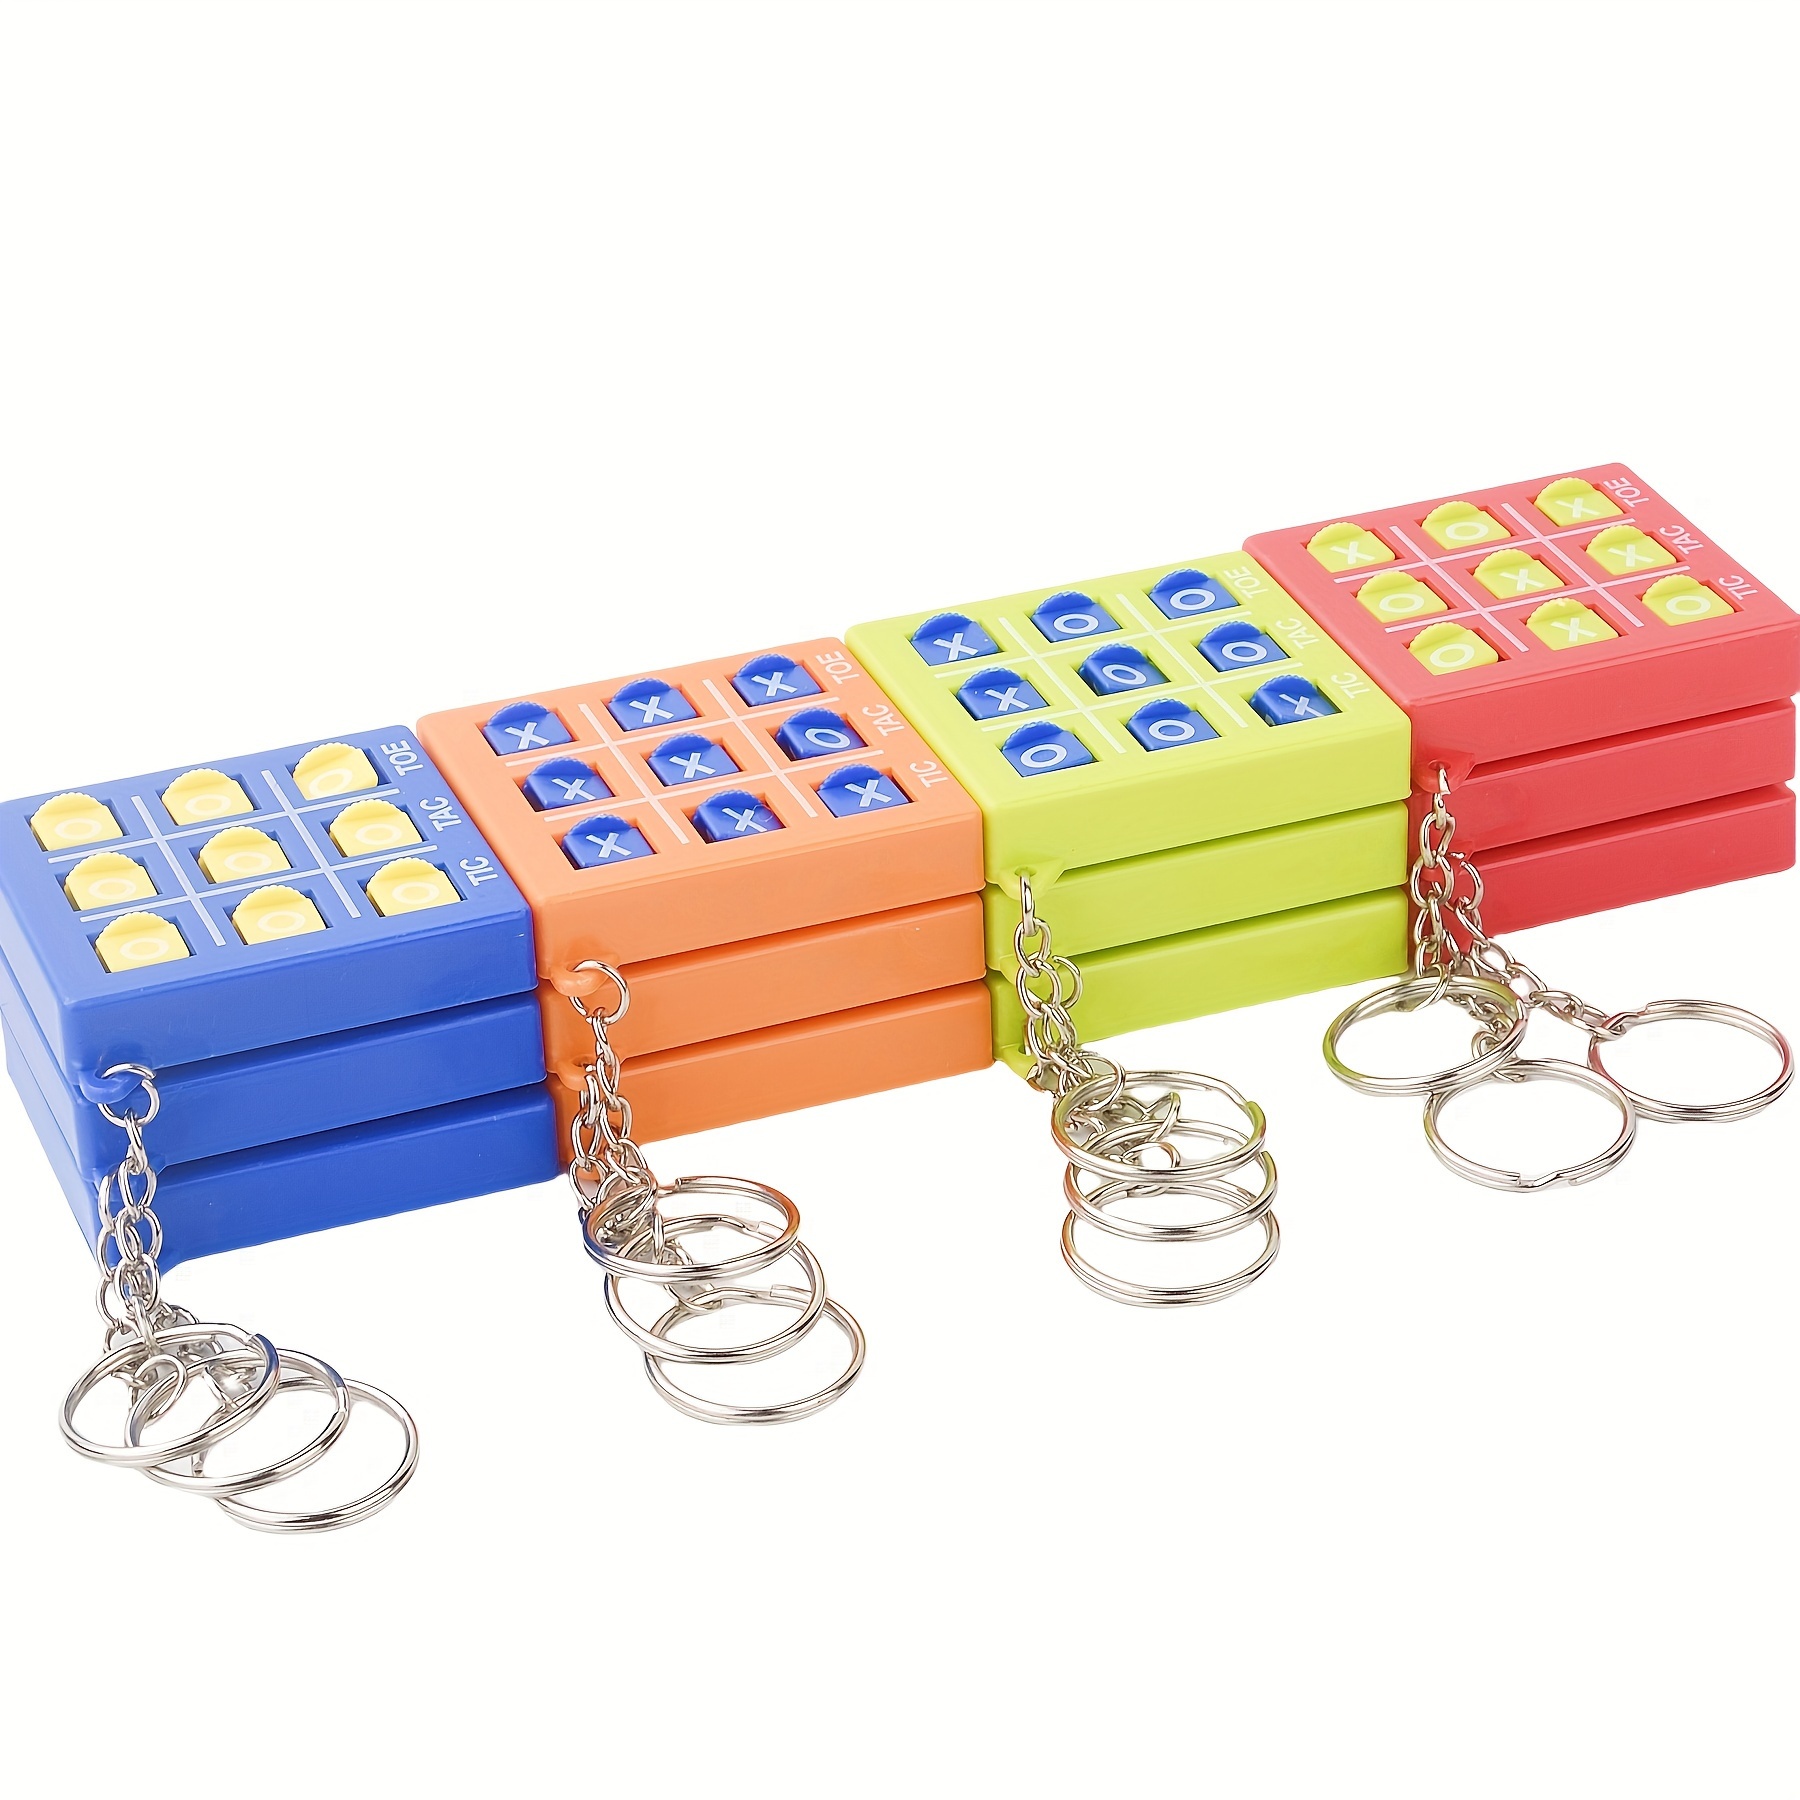 

12-pack Mini Tic Tac Toe Keychain Games - Plastic Tic-tac-toe Key Rings For Kids Party Favors, Educational Travel Board Game Toy For Children Ages 3-6